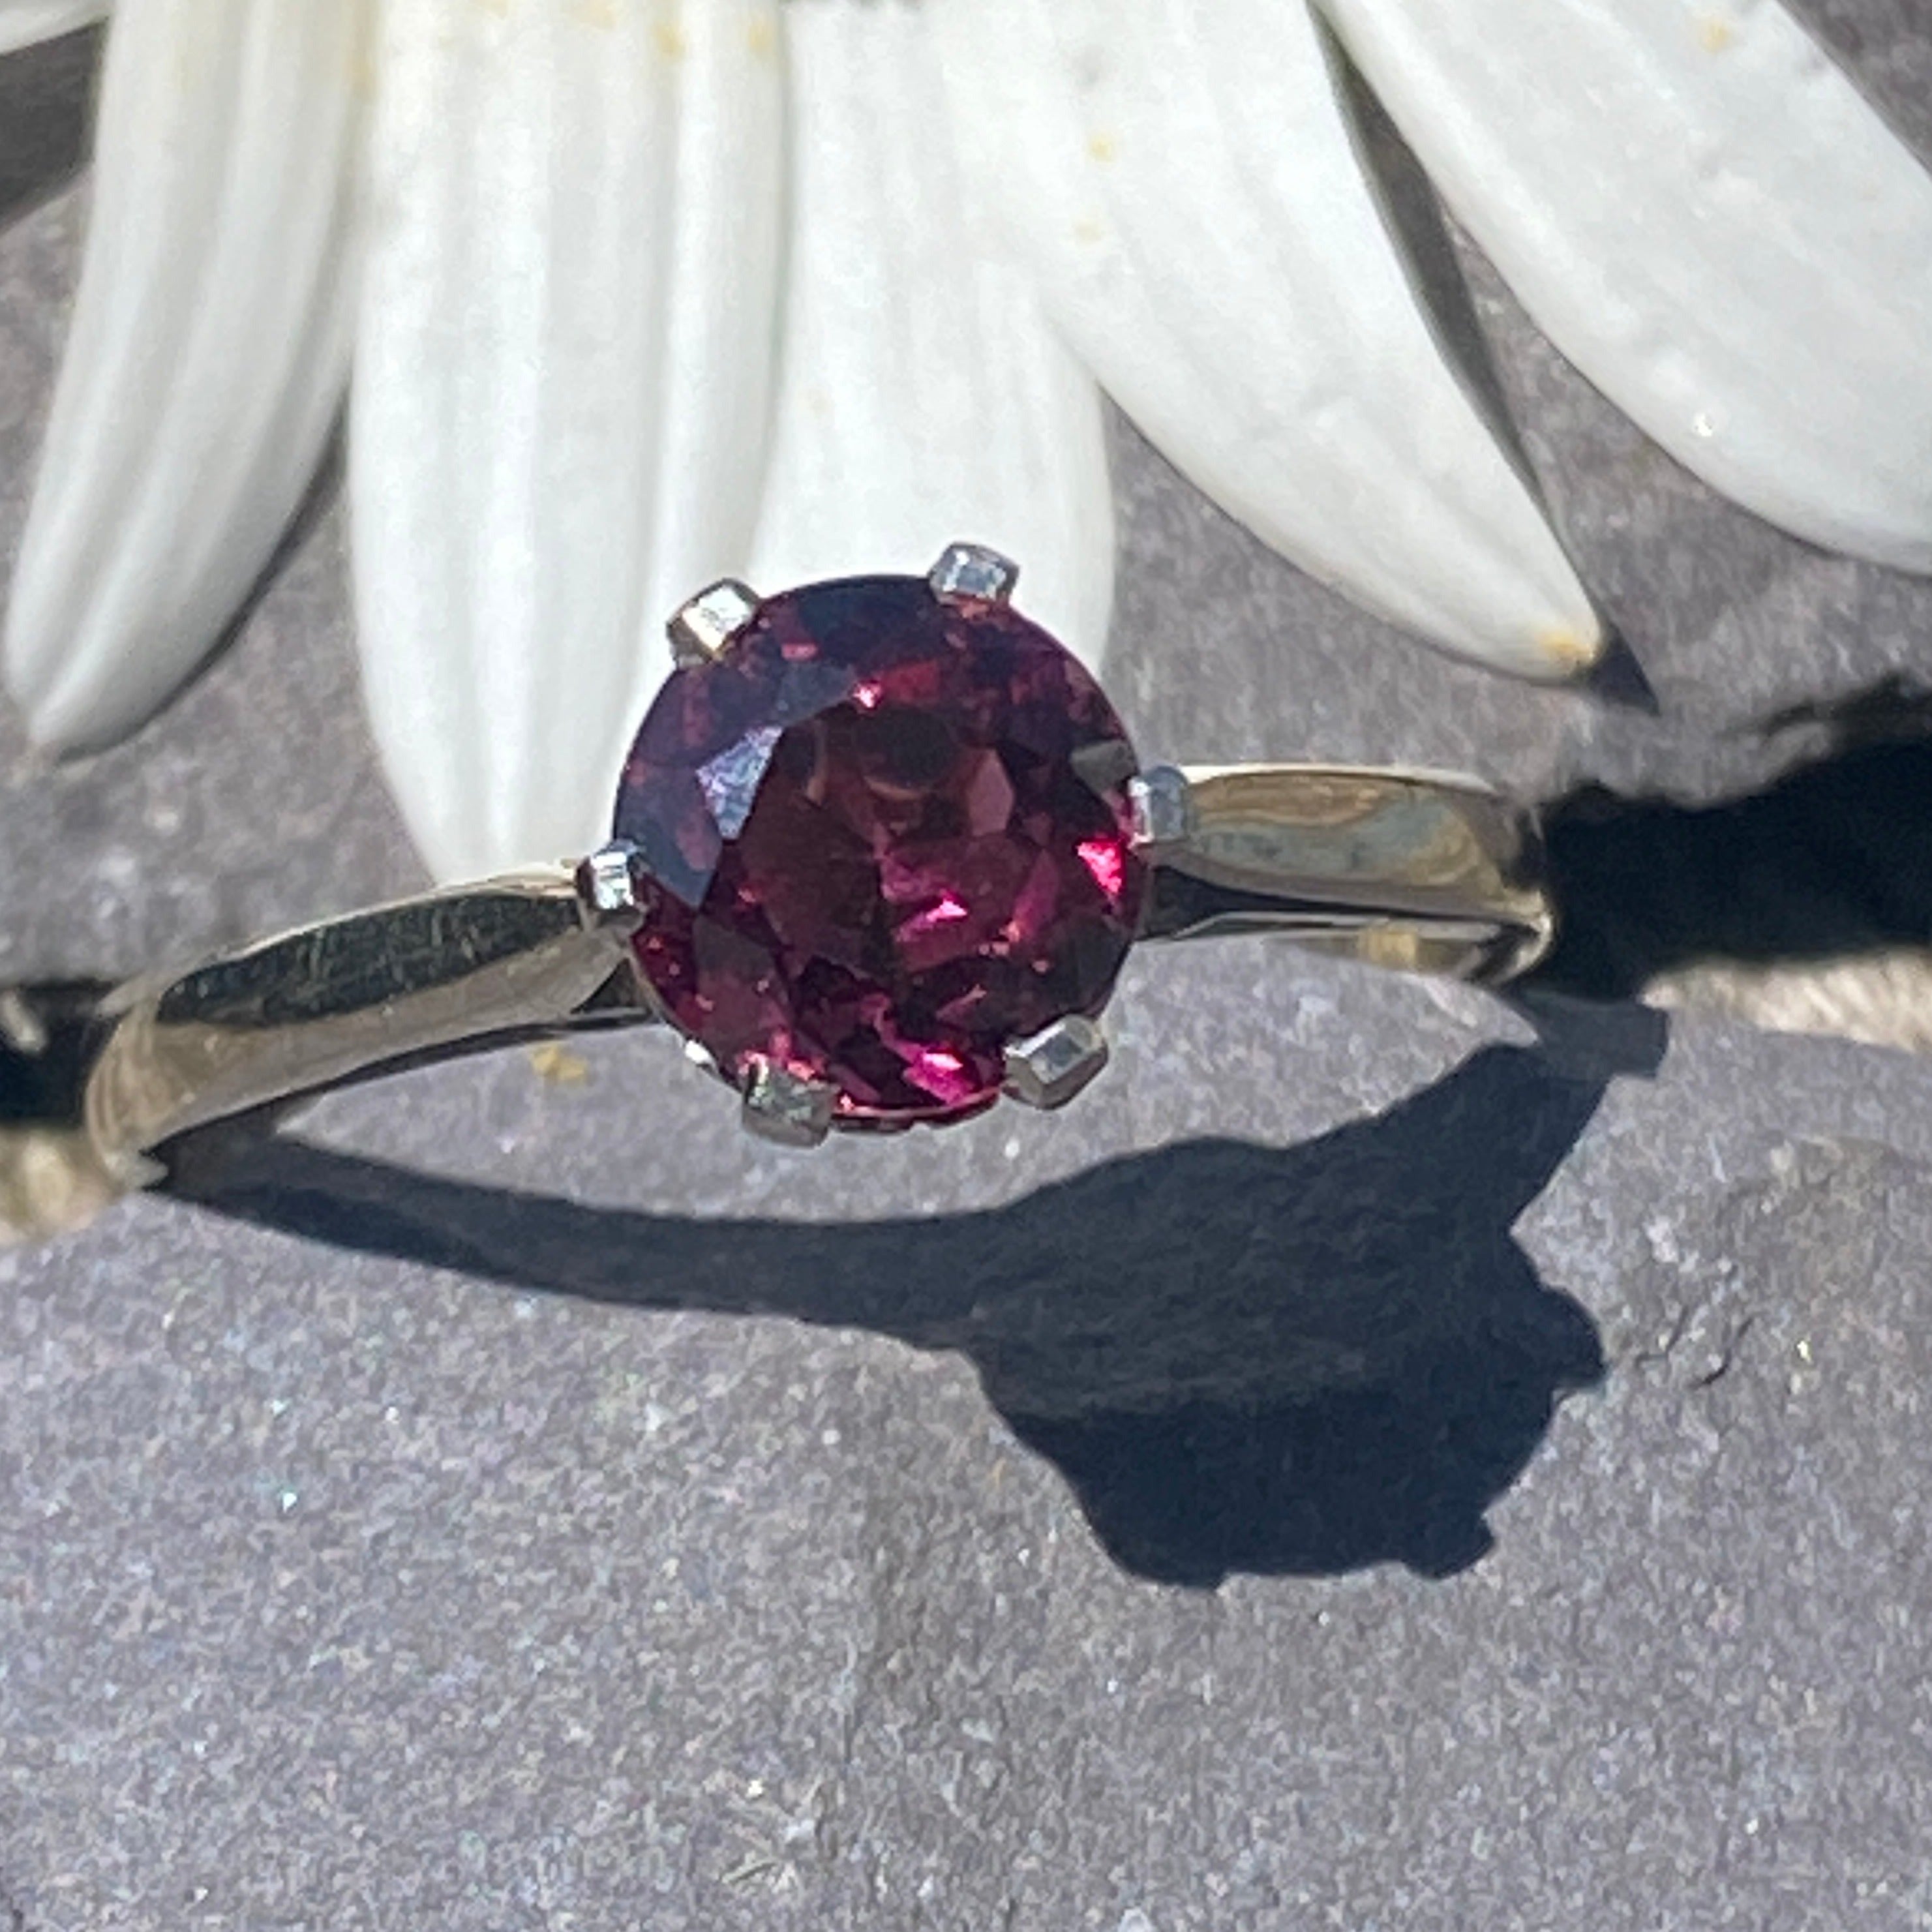 Early 20th Century 18ct White Gold & Platinum Solitaire Garnet Ring Size K 1/2 or 5 1/2 USA.